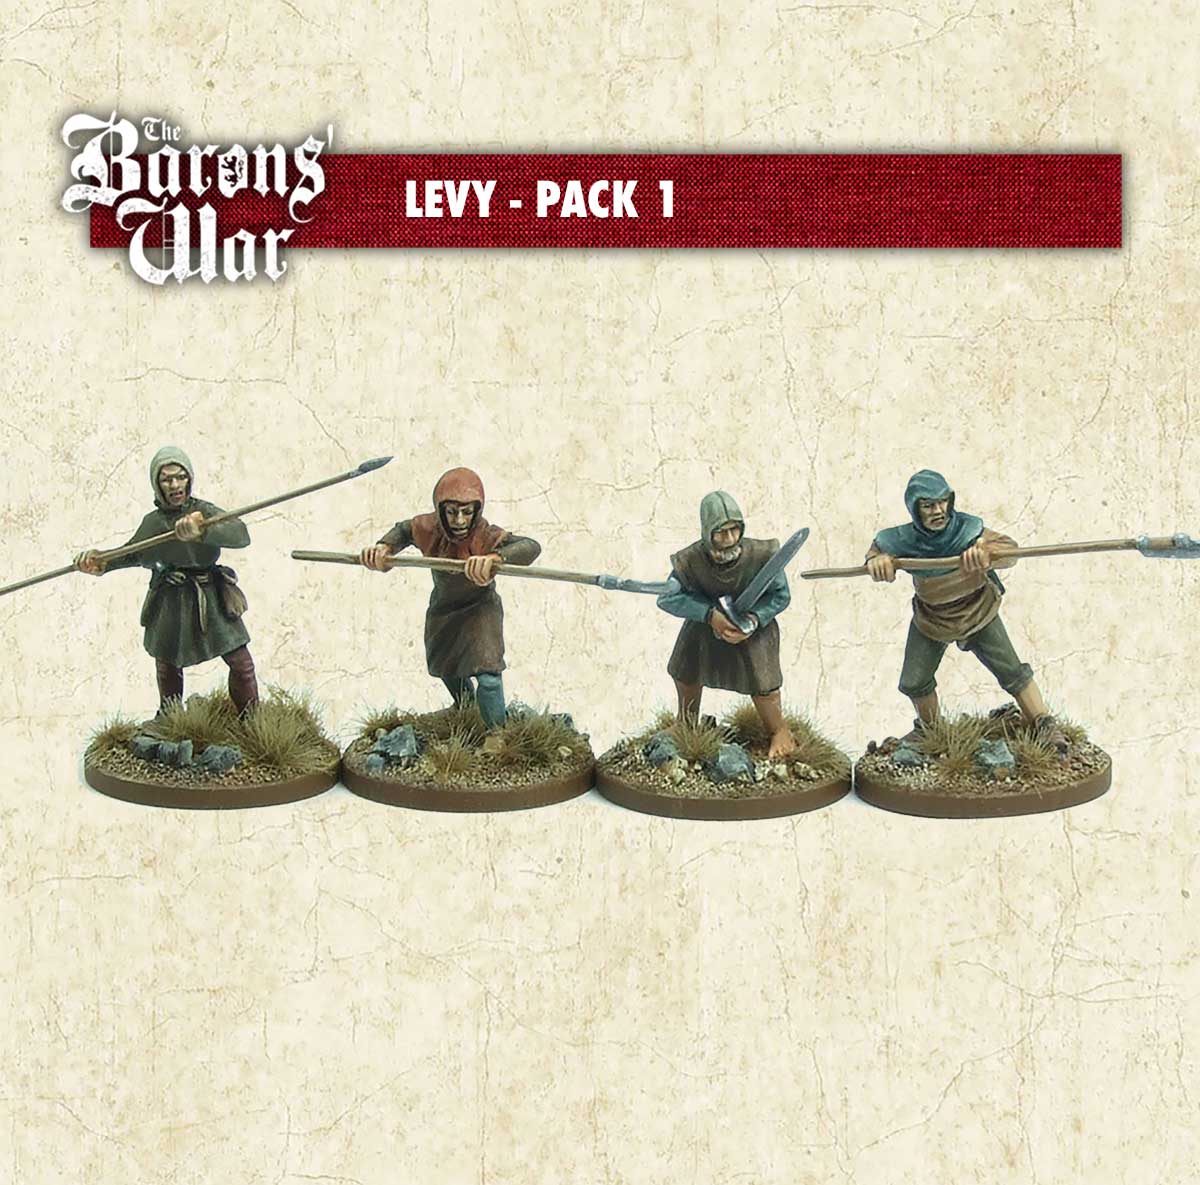 Levy 1 Footsore medieval historical miniatures